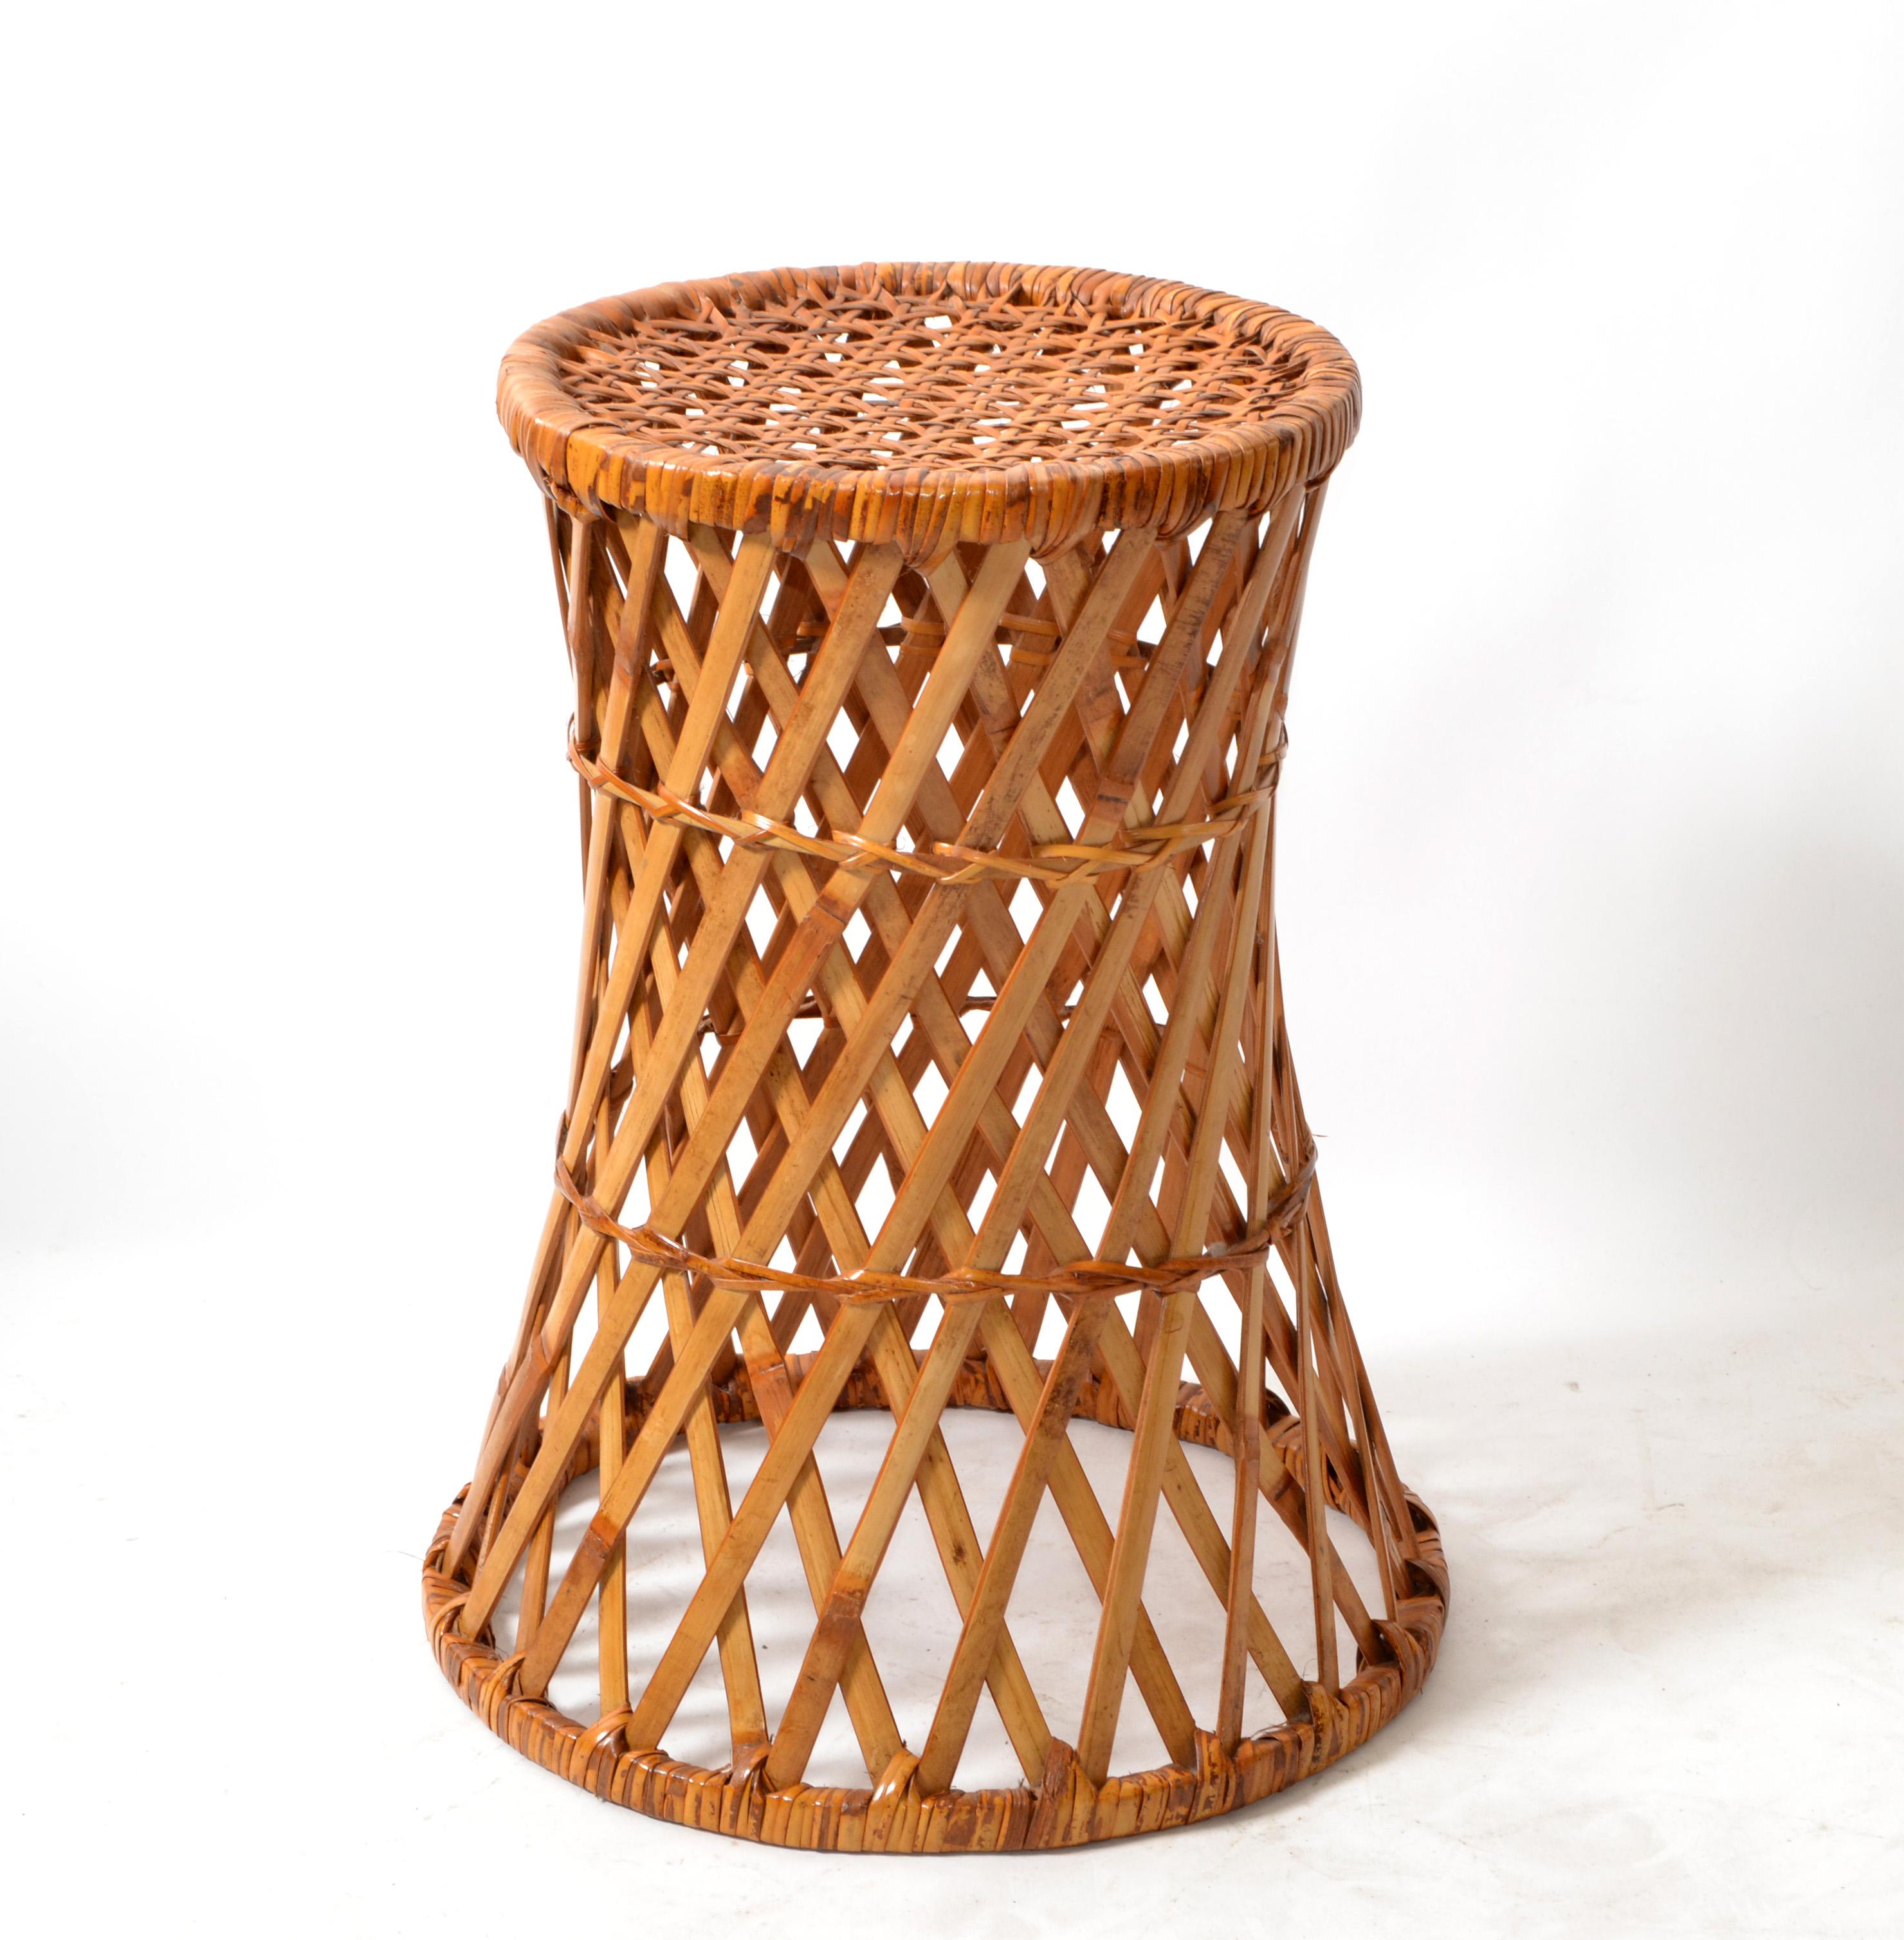 All handwoven cone shaped Bamboo, wicker and rattan drum table, side table, drink table or stool in Bohemian period style.
Top diameter measures: 11.13 inches.
Height: 18 inches.
Fully Restored Boho Chic piece ready for a new Tropical Home